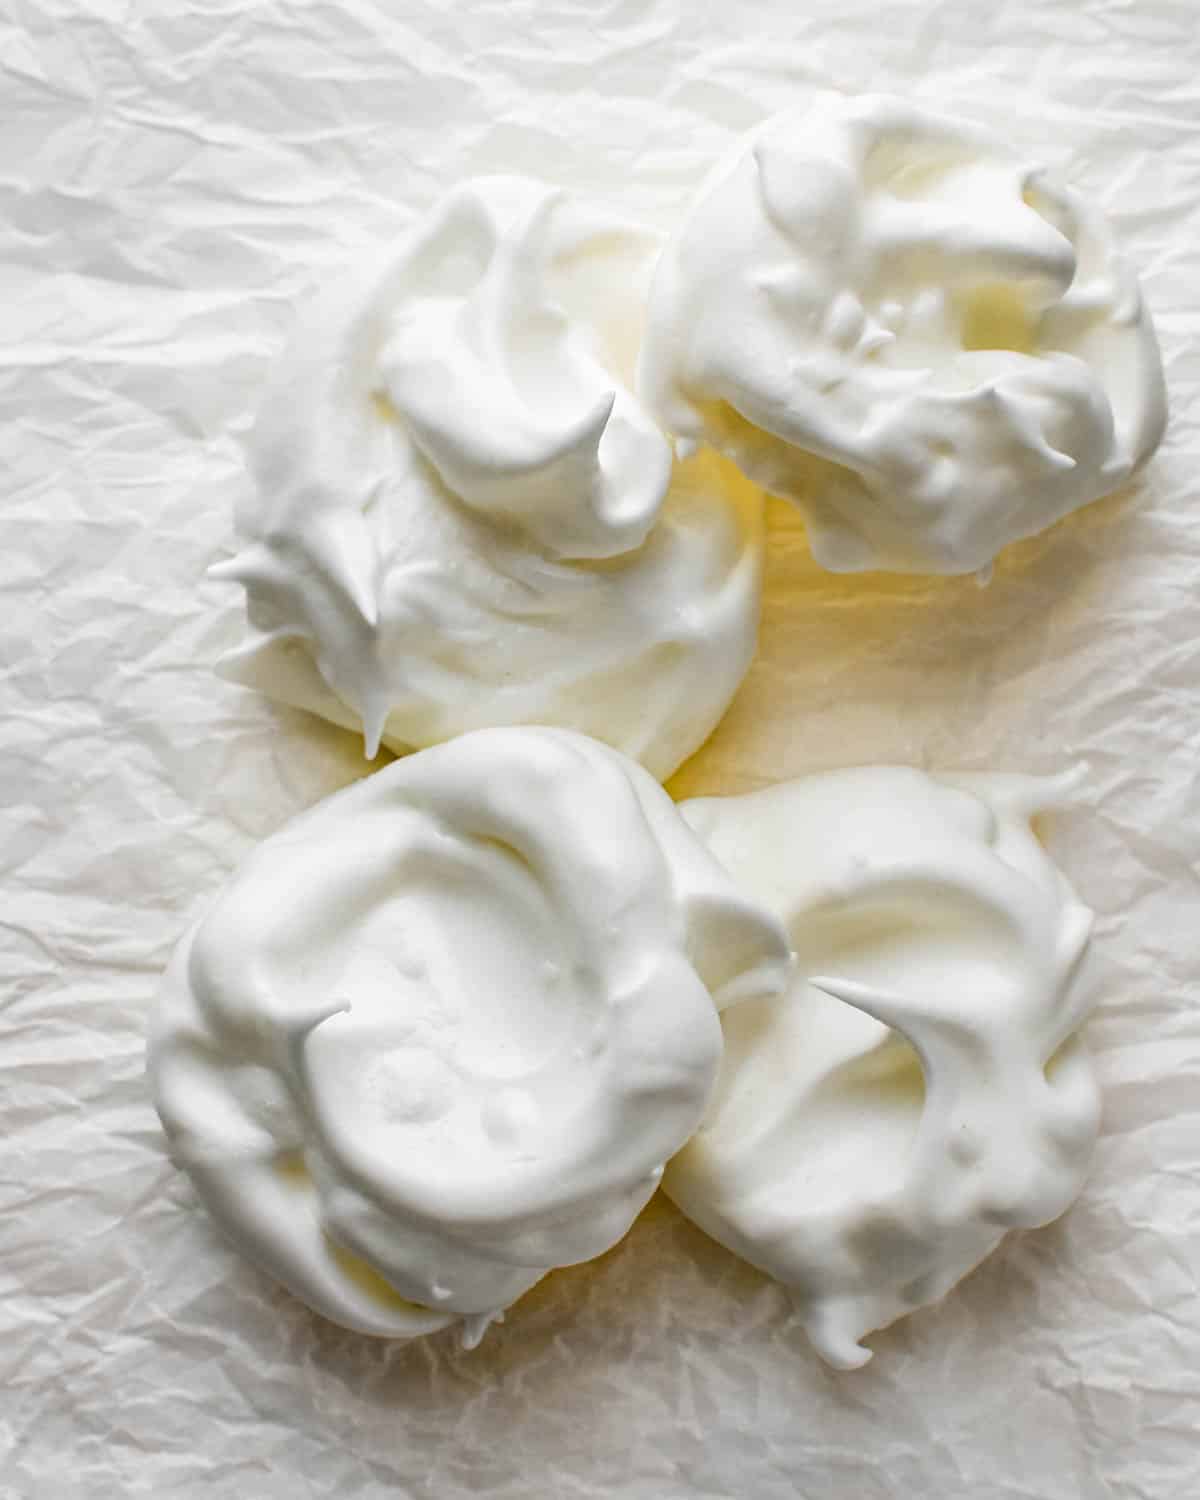 Baked meringues are light and crispy.